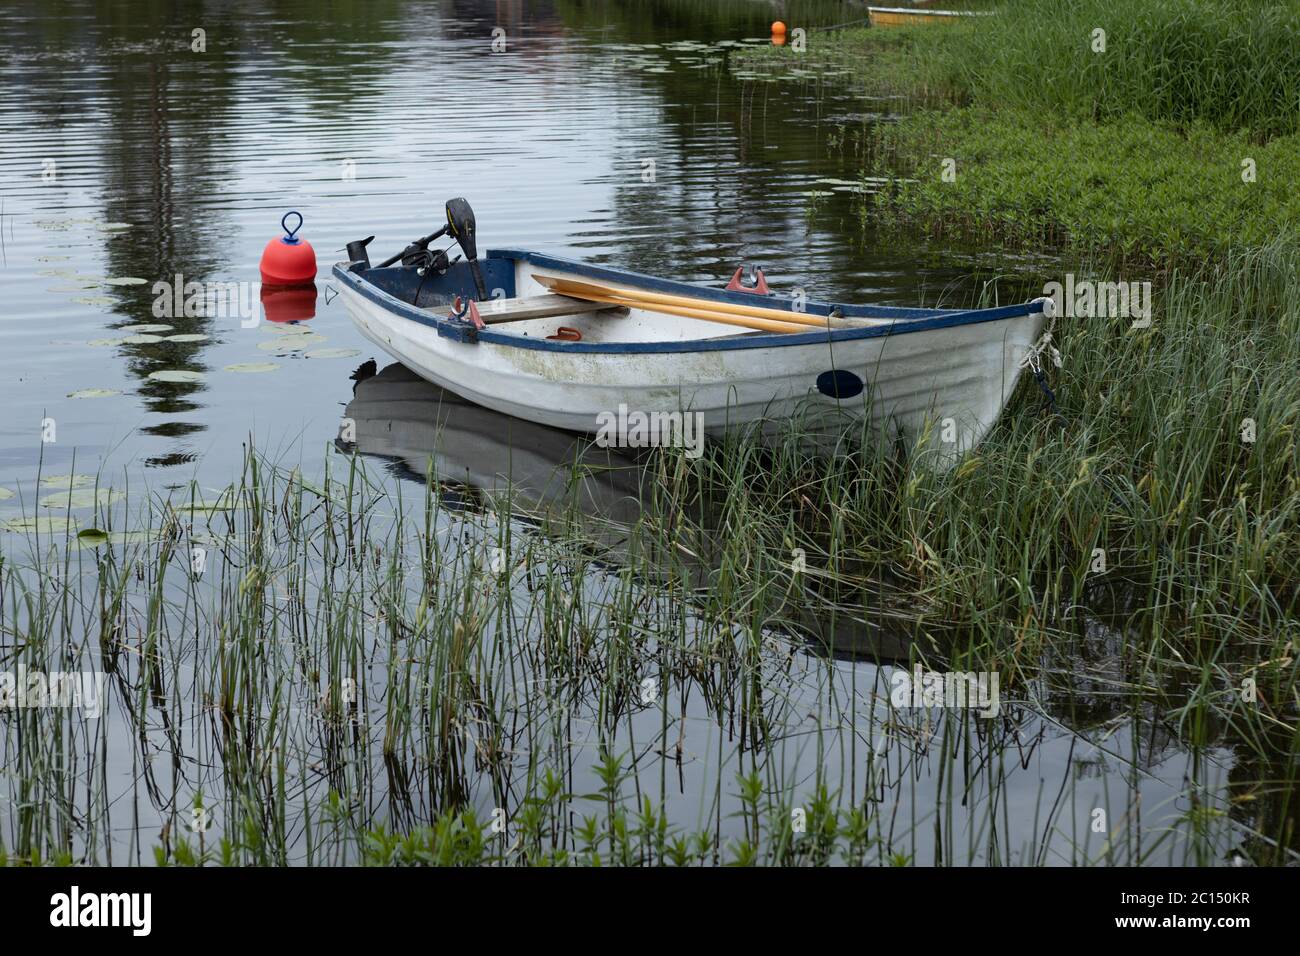 Plastic row boat with electric engine on a lake Stock Photo - Alamy